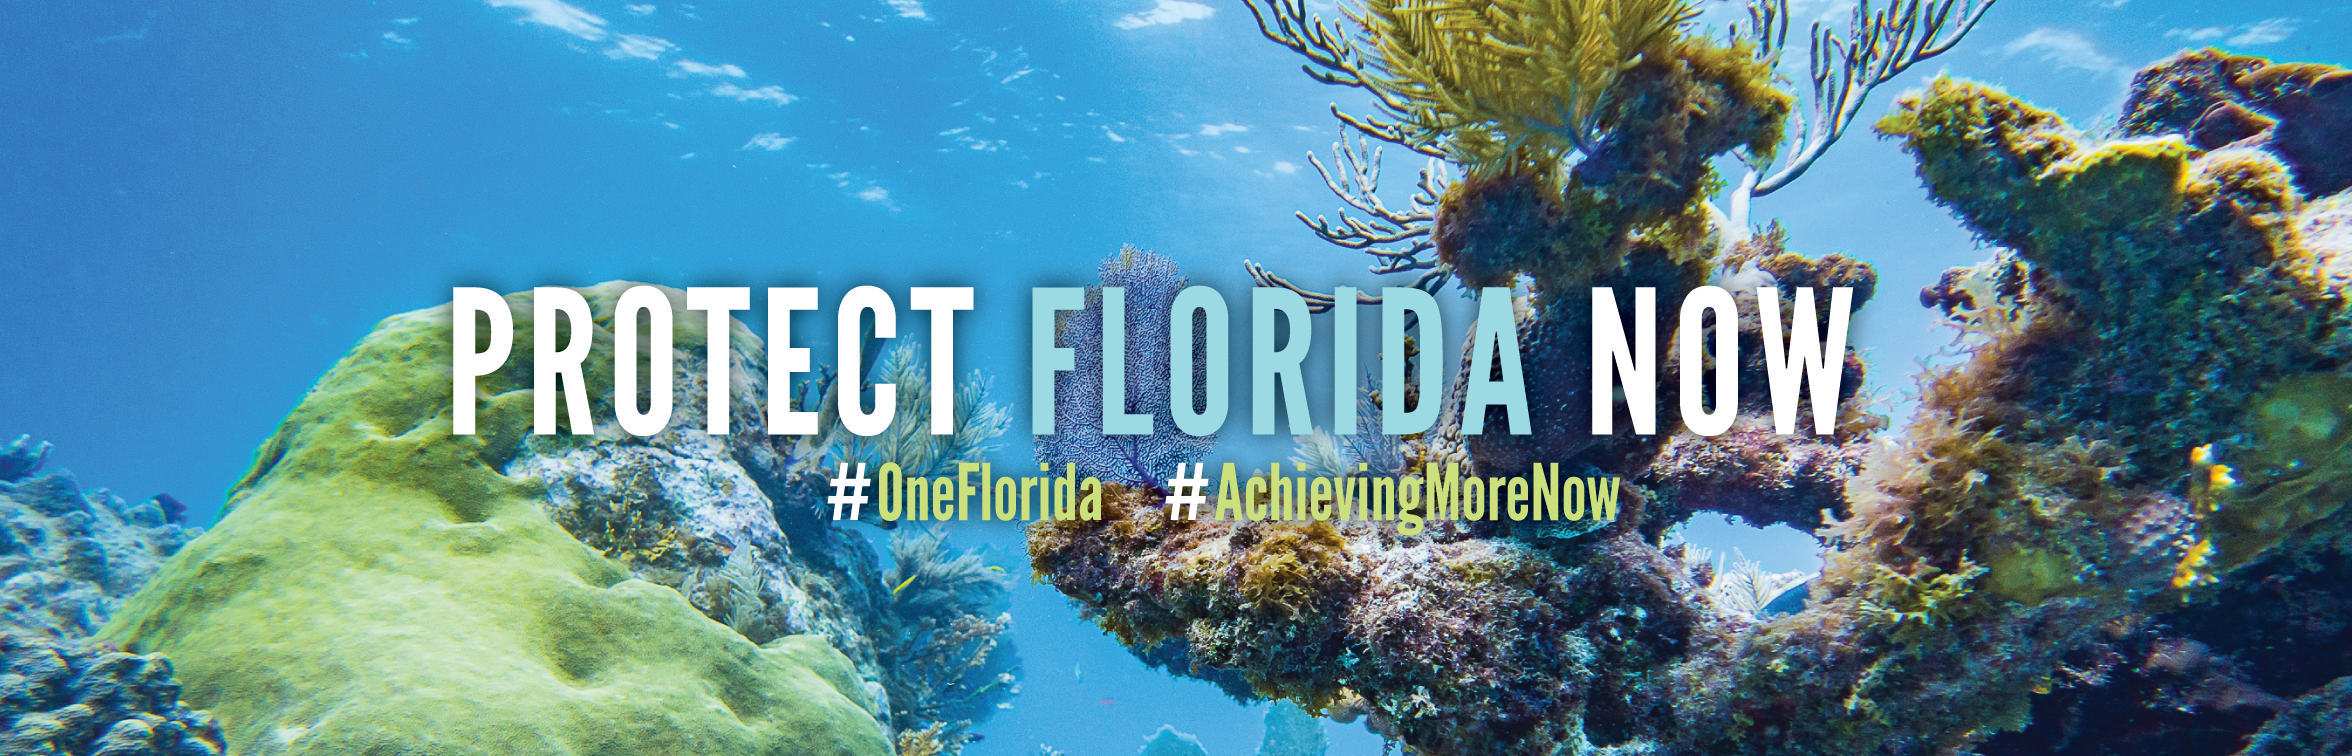 Protecting Florida Now Banner